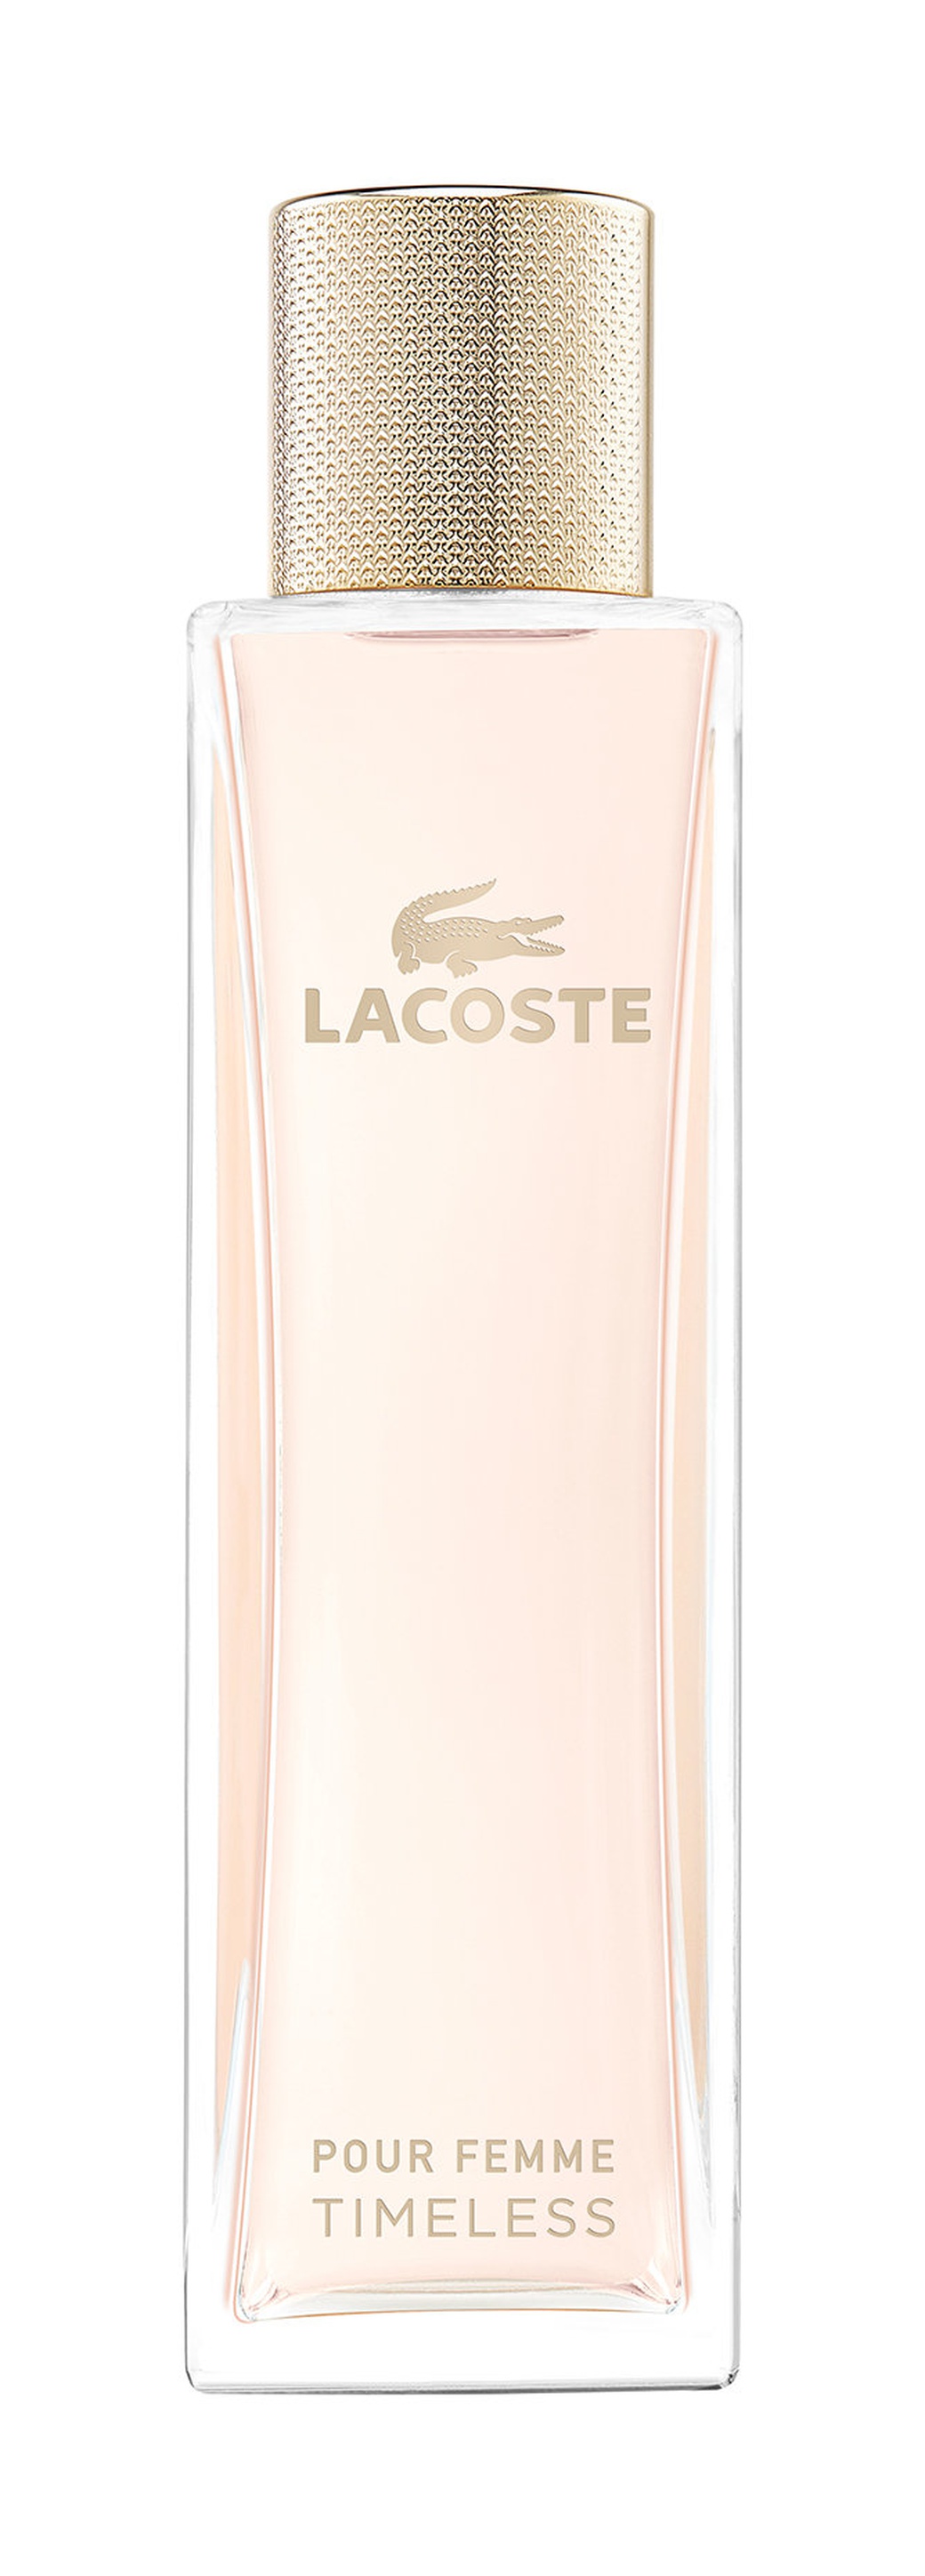 Парфюмерная вода Lacoste Pour Femme Timeless W Edp 90 ml фото